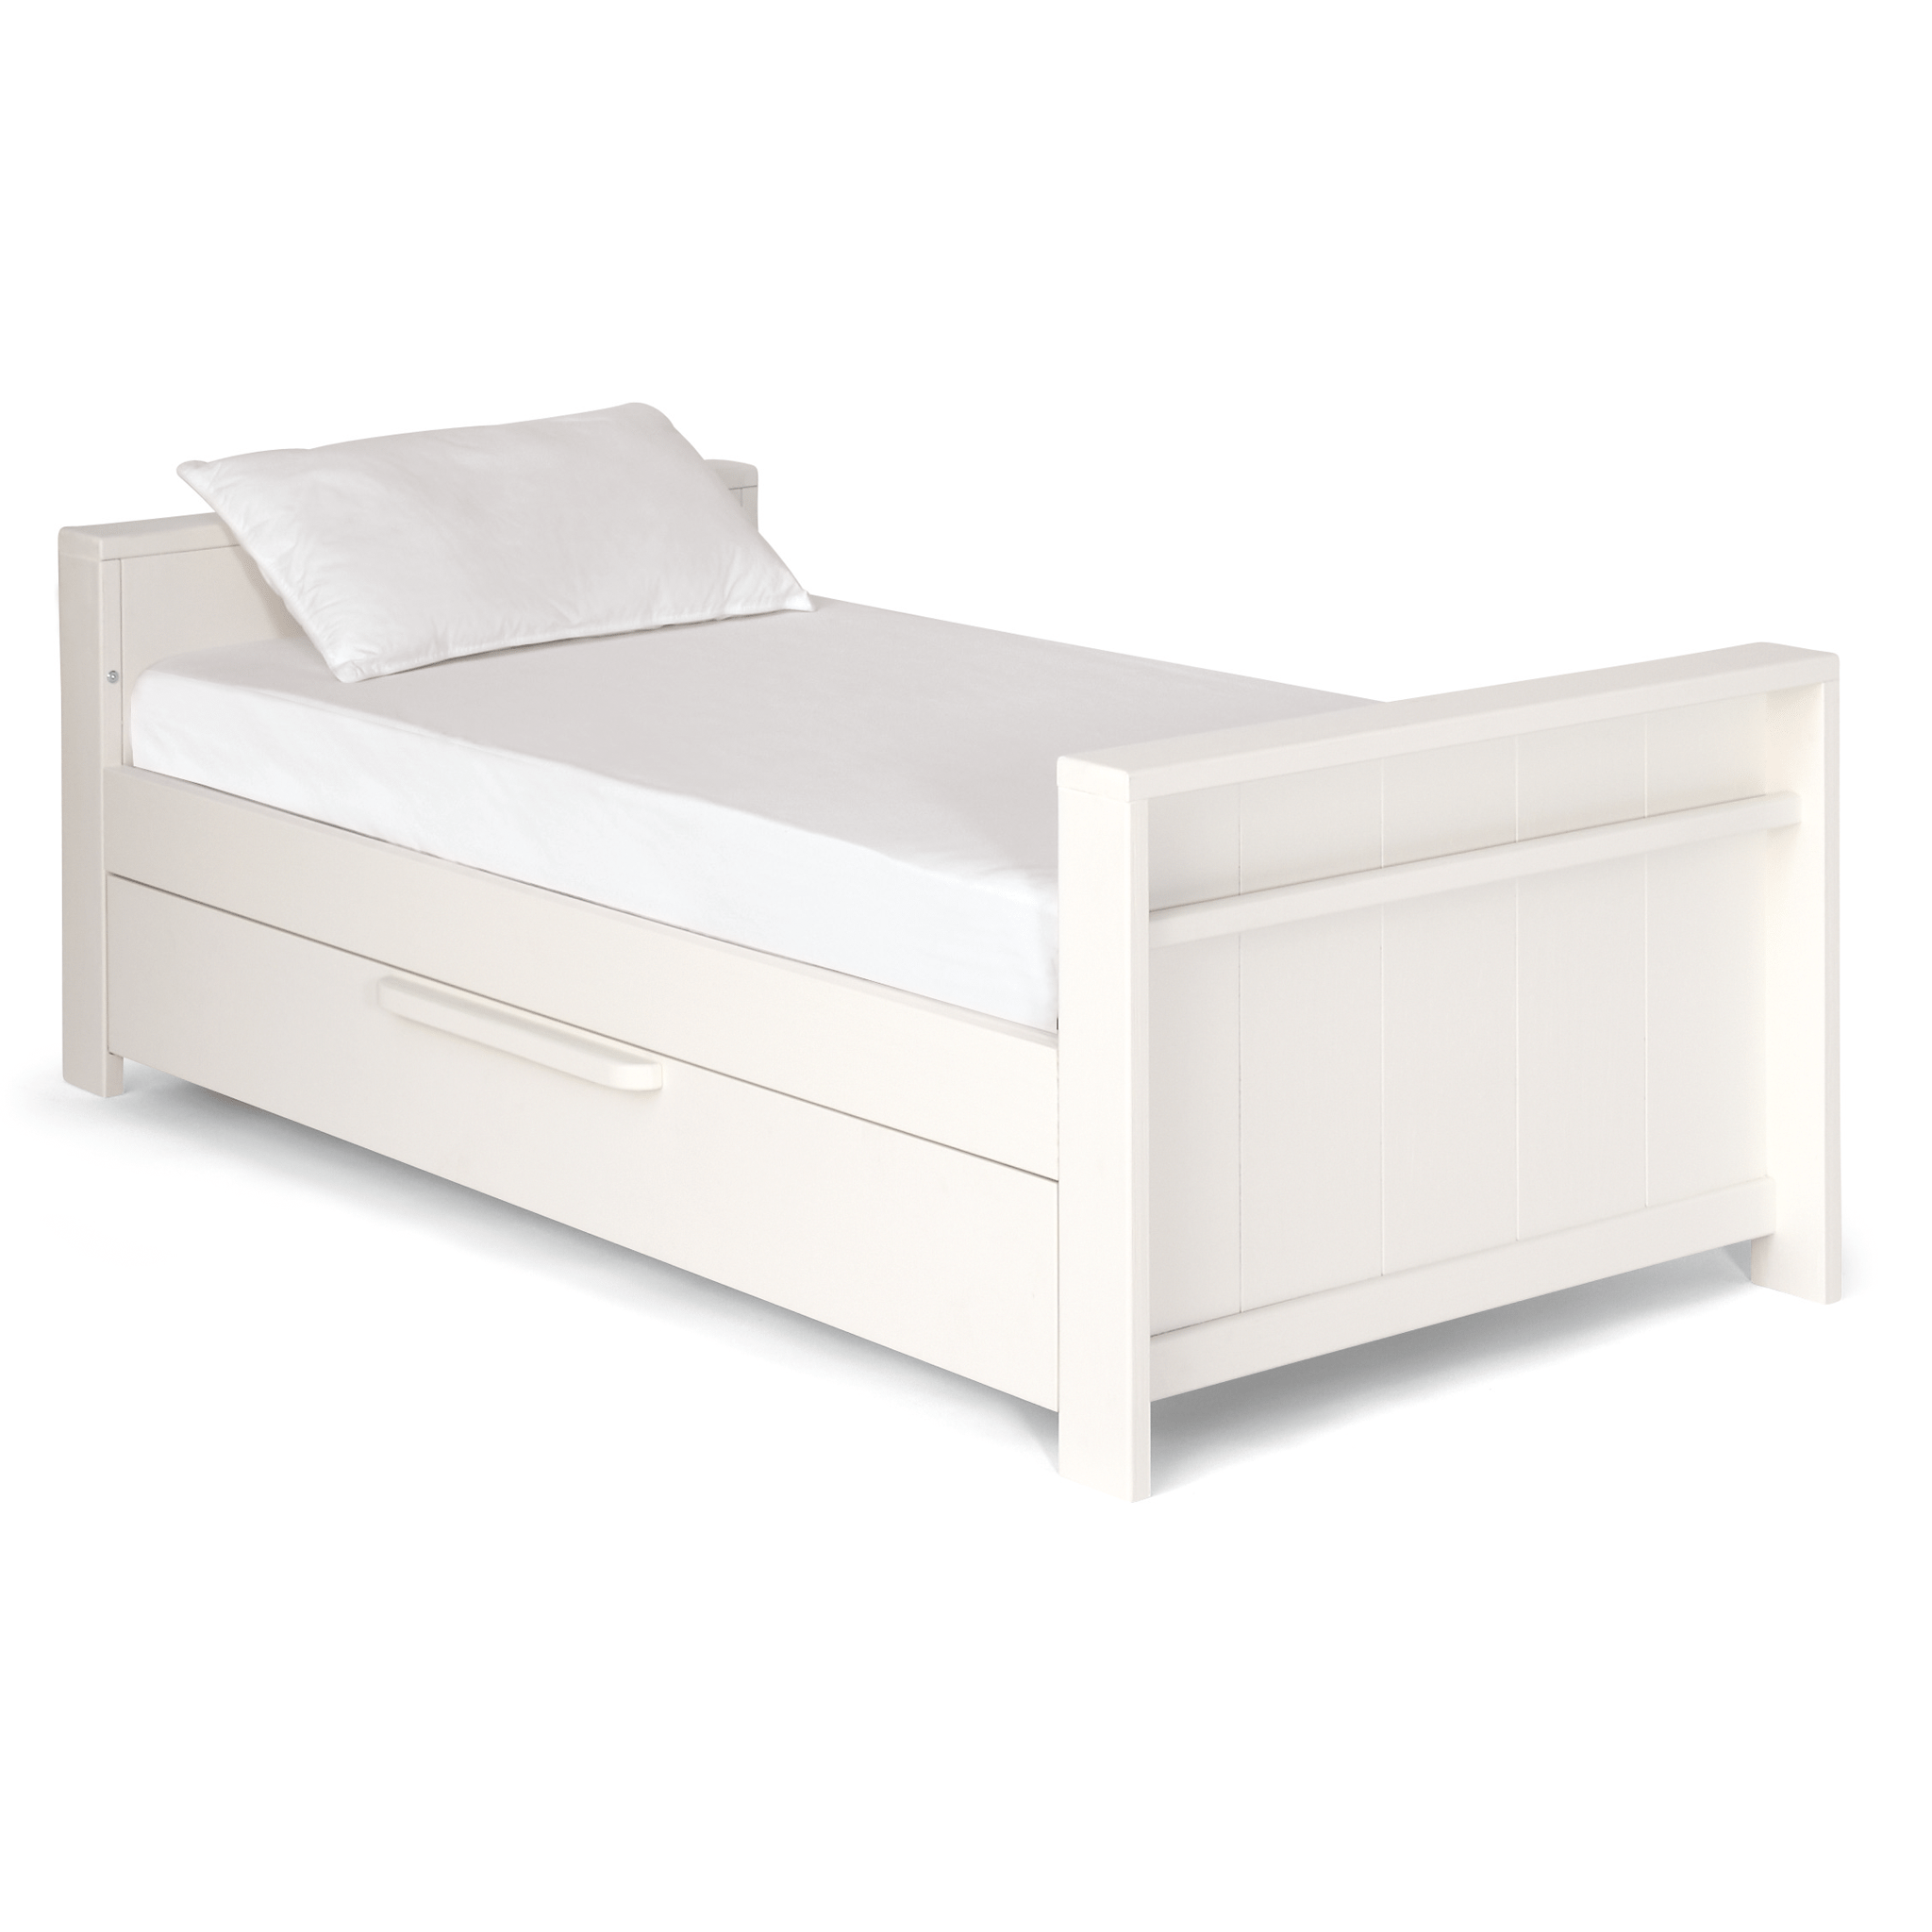 Mamas & Papas Franklin 2 Piece Cot Bed Roomset White Wash